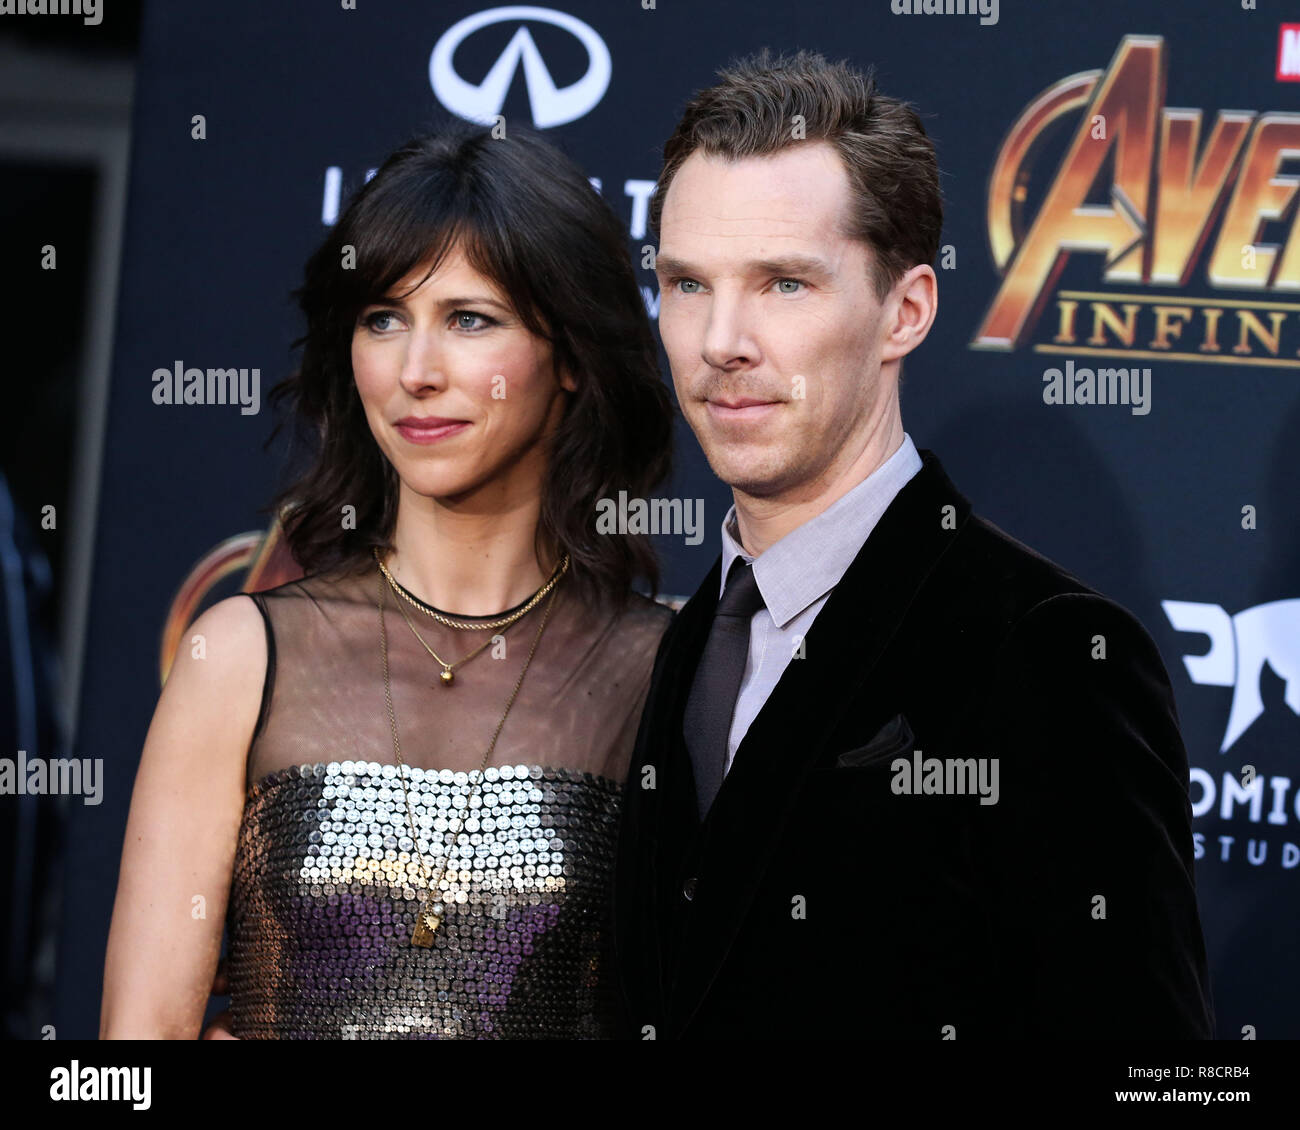 HOLLYWOOD, LOS ANGELES, CA, USA - APRIL 23: Sophie Hunter, Cumberbatch at the World Premiere Of Disney And Marvel's 'Avengers: Infinity War' held at the El Capitan Theatre, Dolby Theatre and TCL Chinese Theatre IMAX on April 23, 2018 in Hollywood, Los Angeles, California, United States. (Photo by Xavier Collin/Image Press Agency) Stock Photo